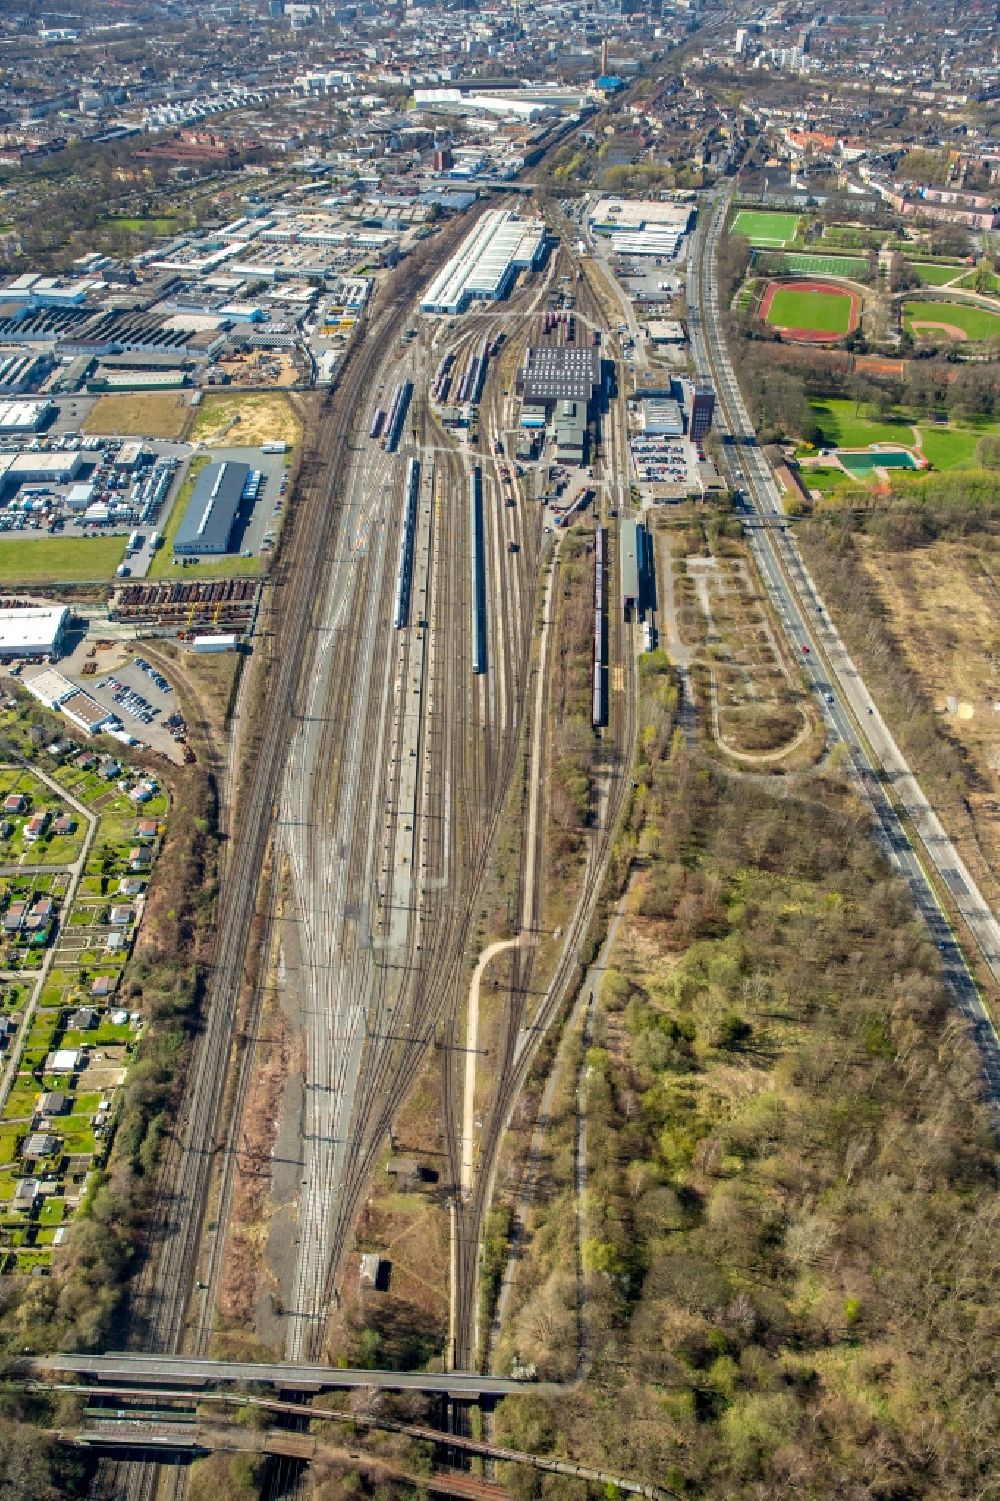 Dortmund from the bird's eye view: Marshalling yard and freight stations of the depot station of the Deutsche Bahn in Dortmund in the state of North Rhine-Westphalia